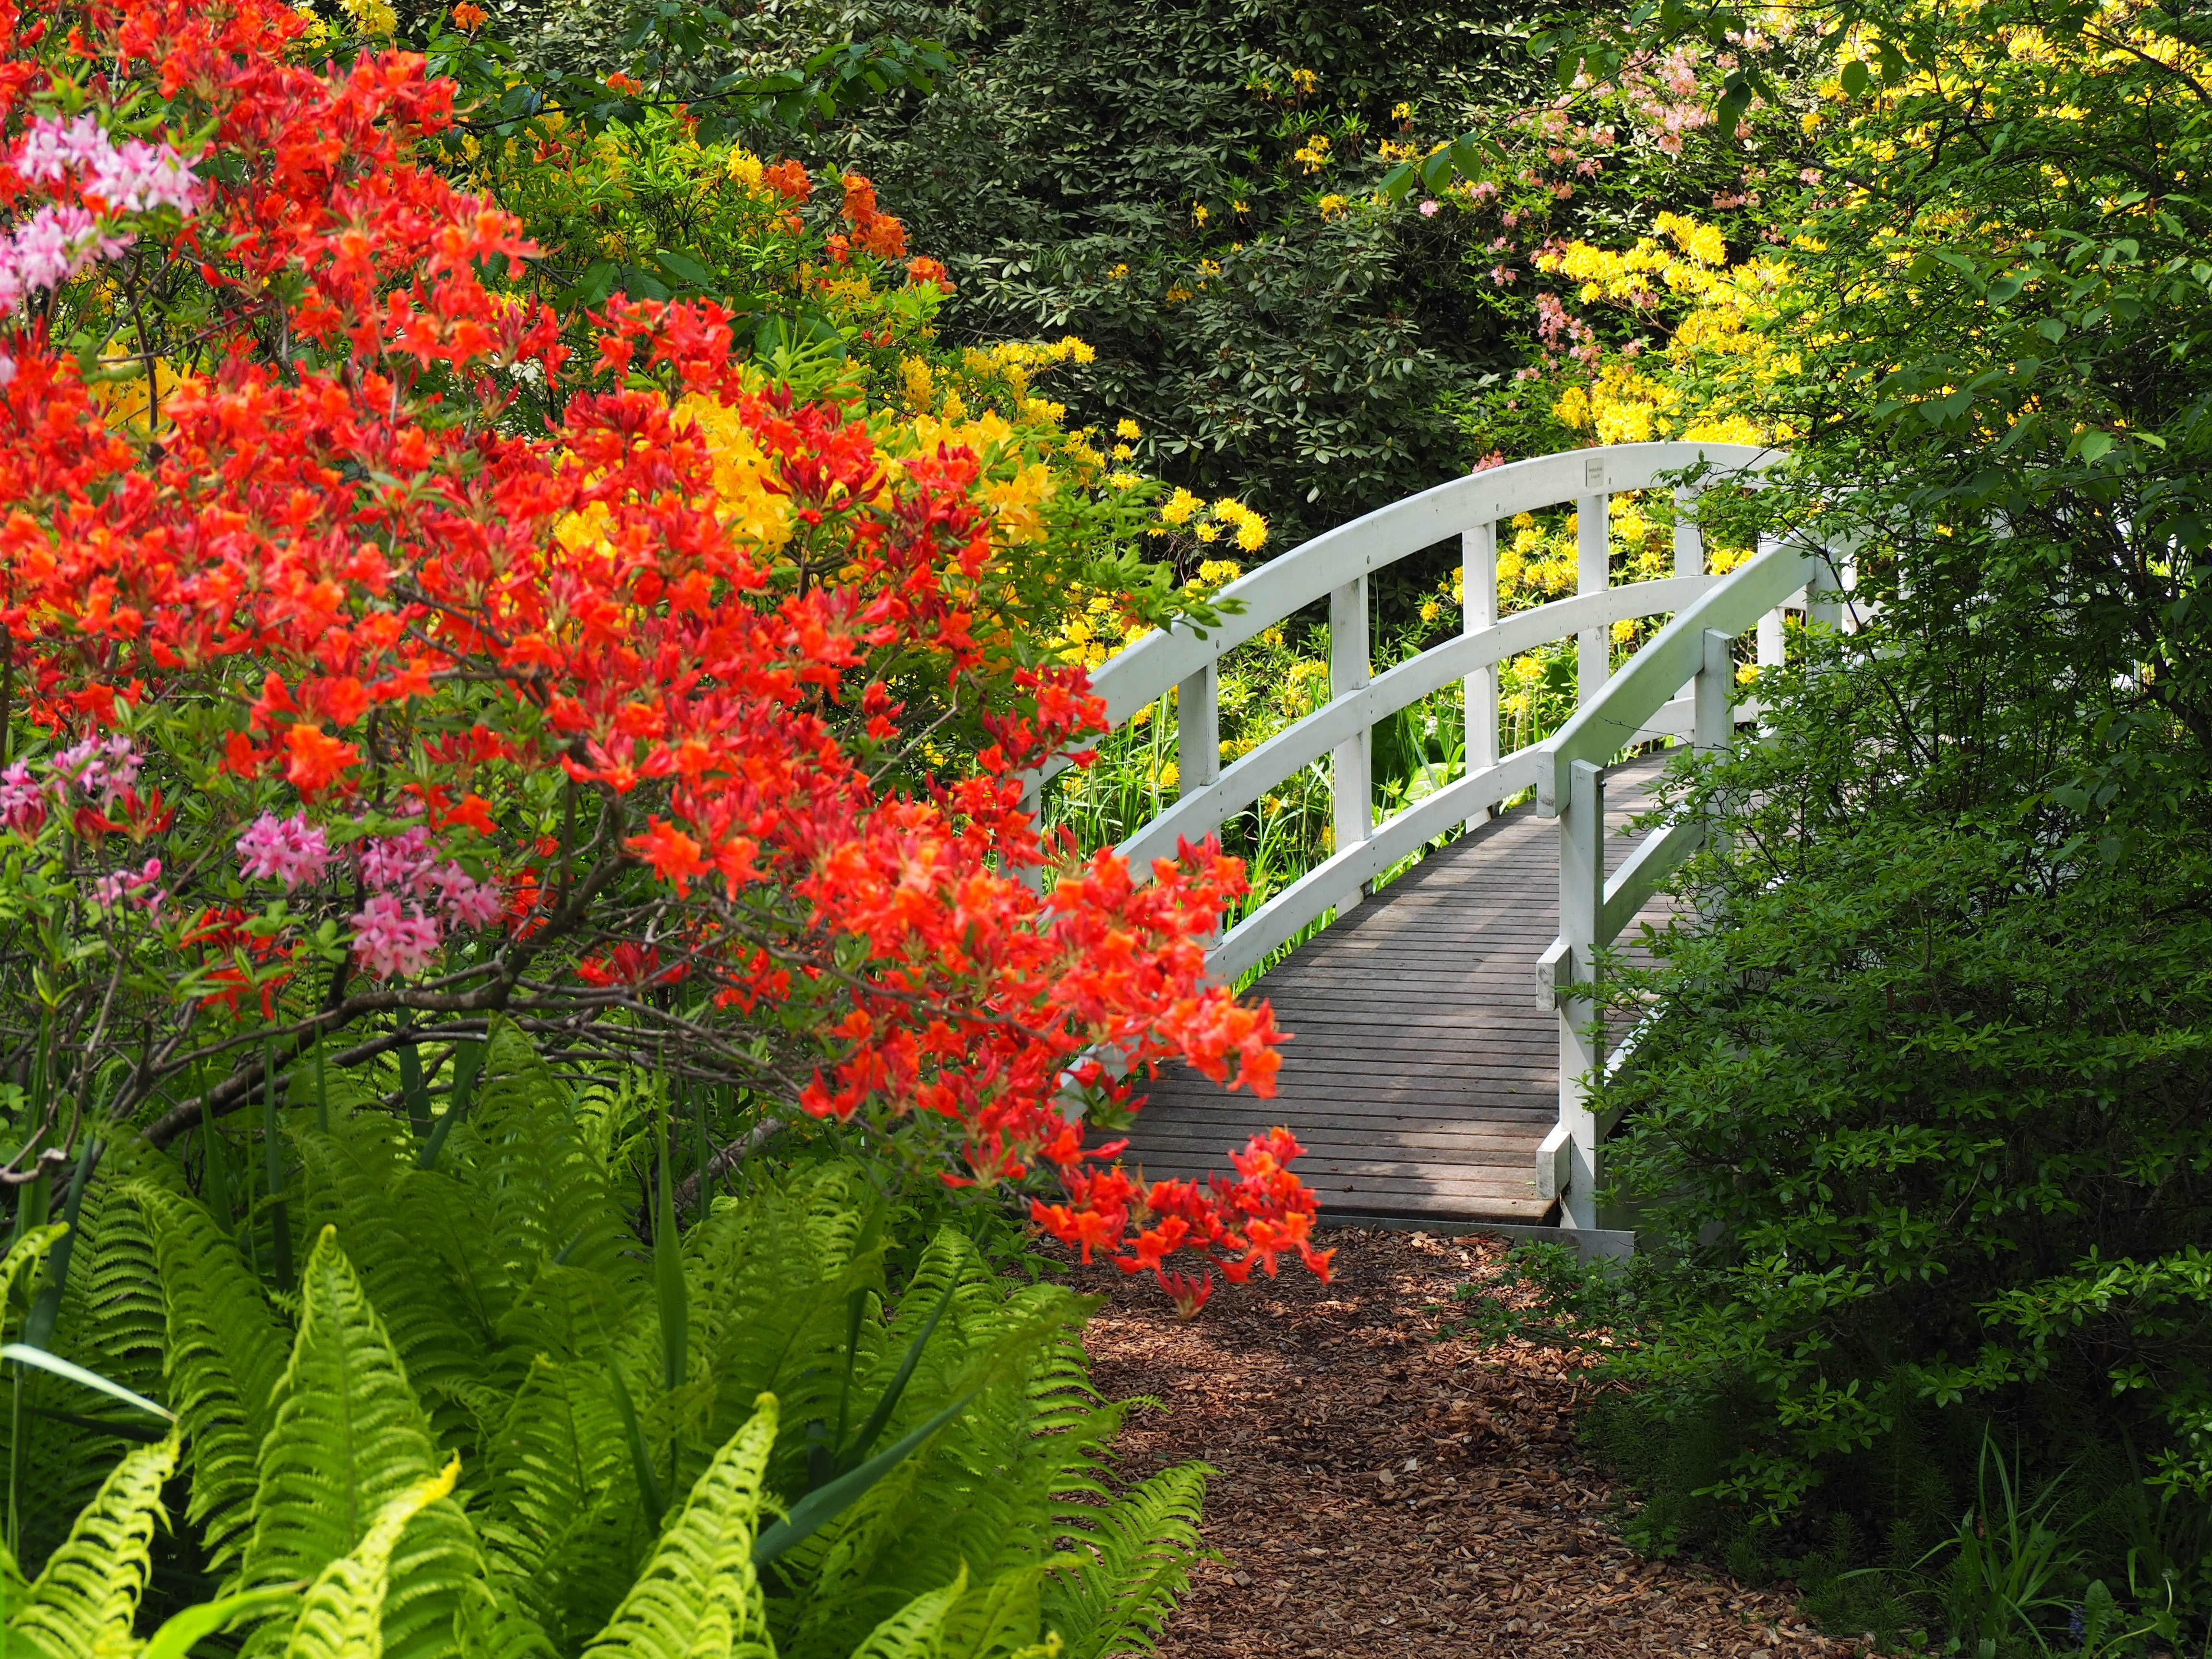 white wooden bridge in the middle of red and yellow flowers